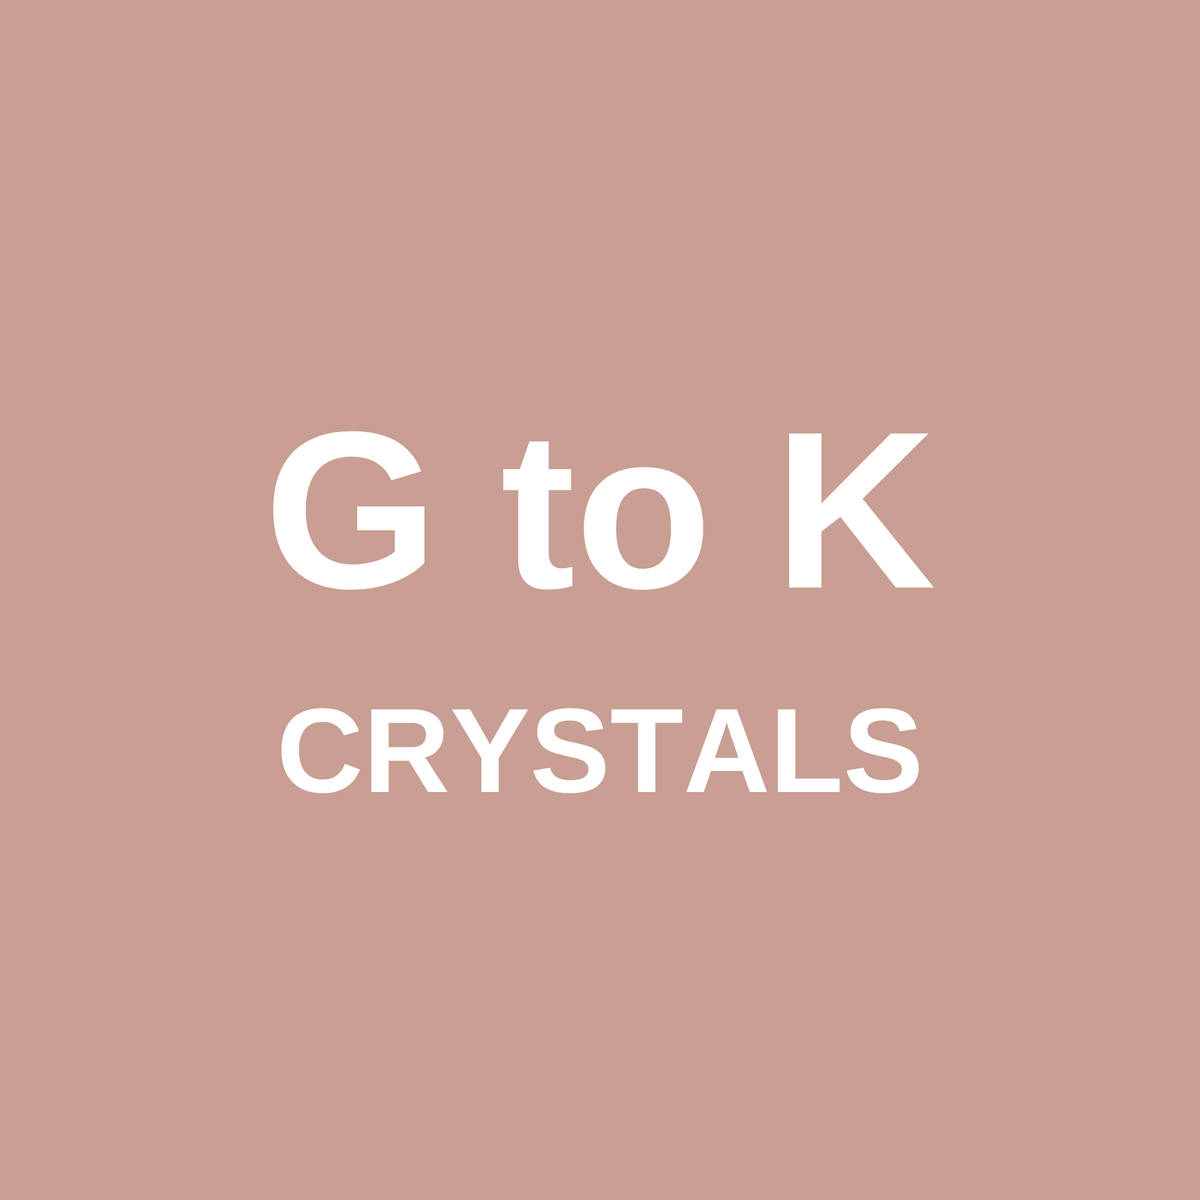 G to K